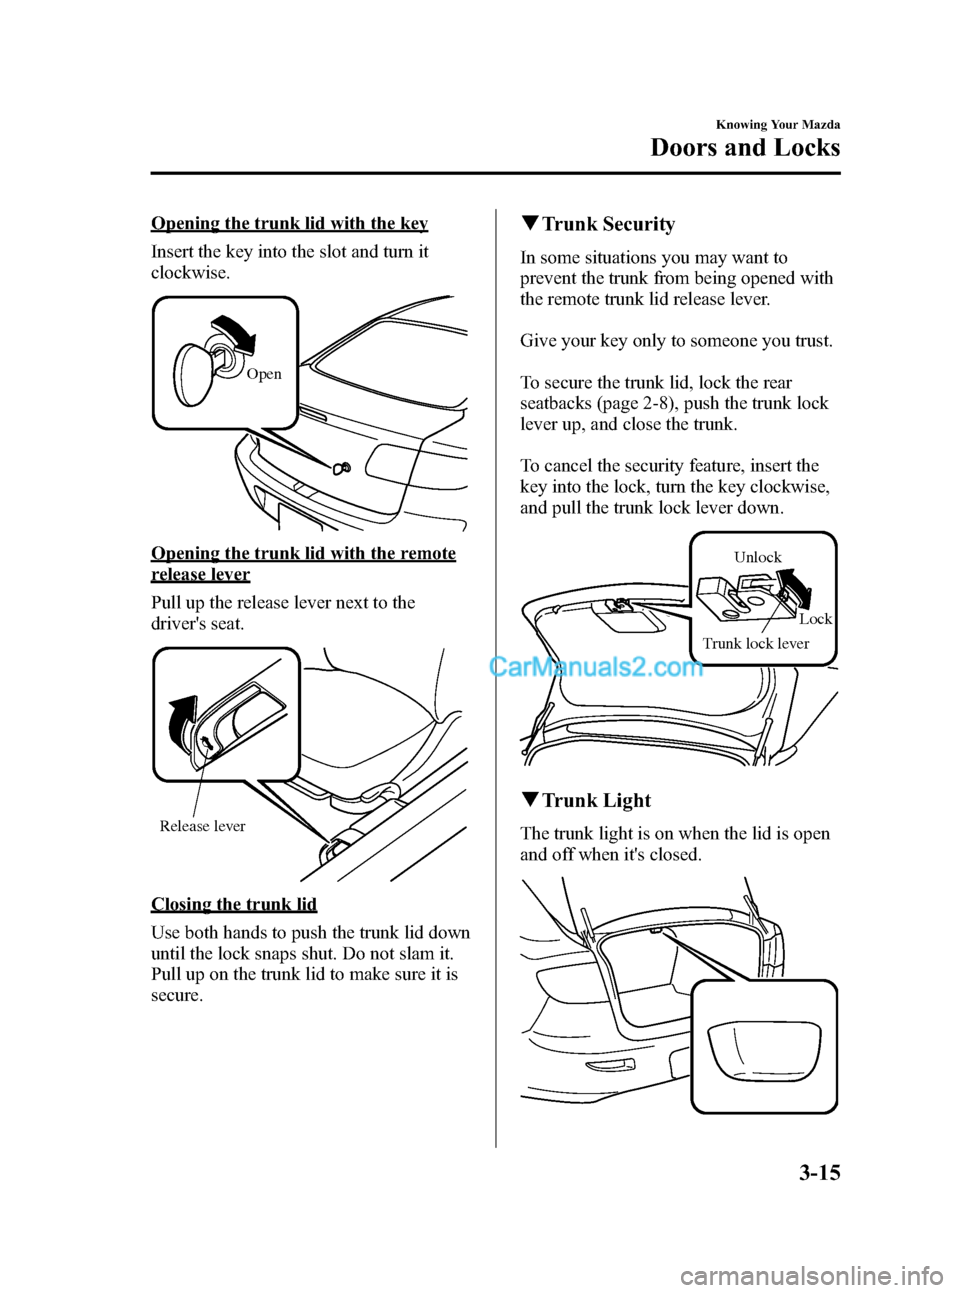 MAZDA MODEL MAZDASPEED 3 2008  Owners Manual (in English) Black plate (87,1)
Opening the trunk lid with the key
Insert the key into the slot and turn it
clockwise.
Open
Opening the trunk lid with the remote
release lever
Pull up the release lever next to the